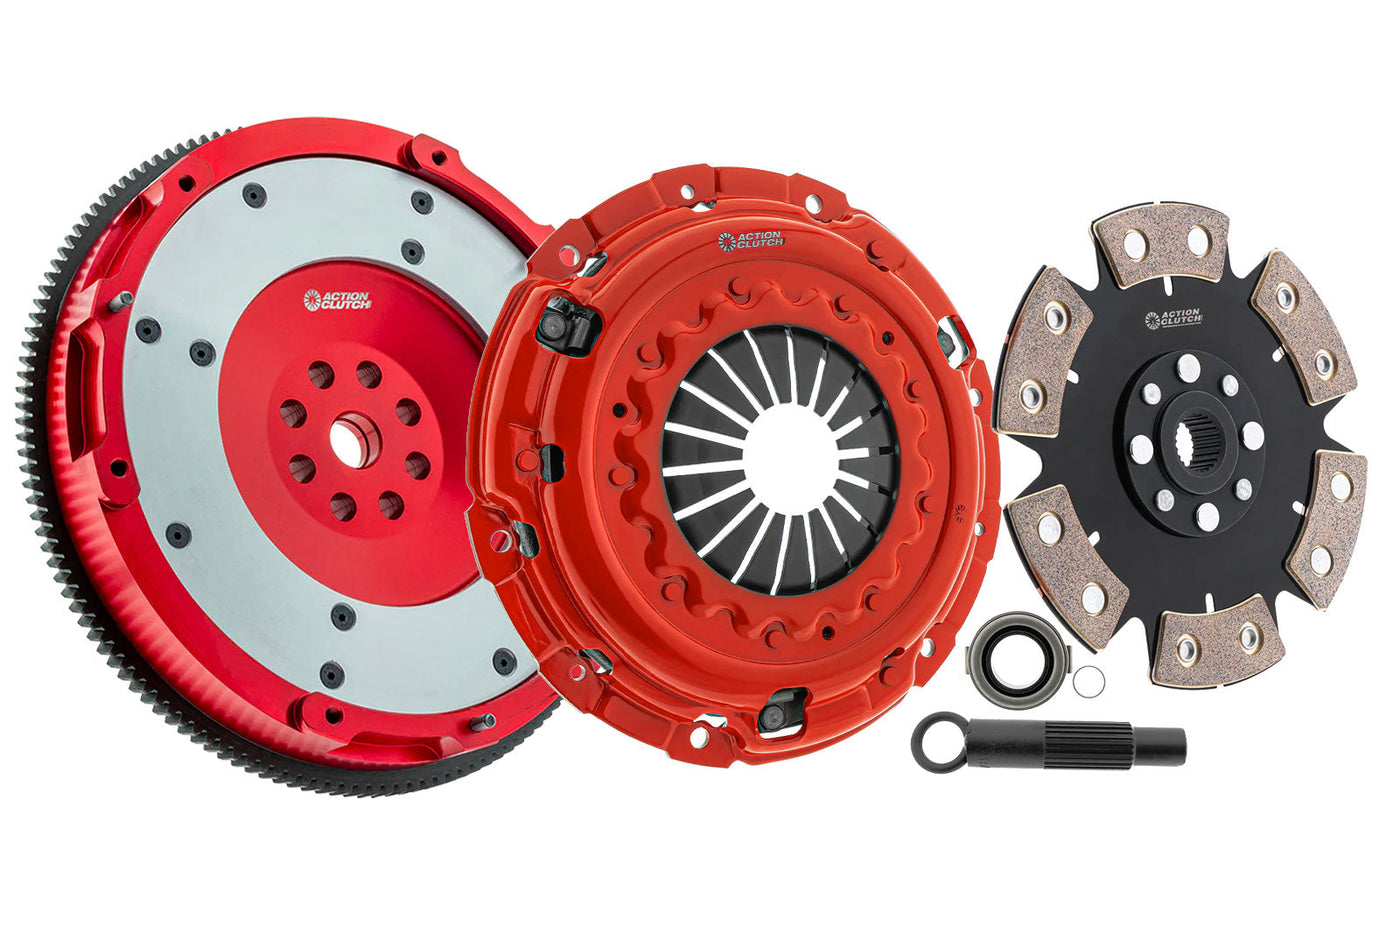 Stage 4 Clutch Kit (1MD) for Honda Civic SI 2022 1.5L (L15B7) Turbo Includes Aluminum Lightweight Flywheel